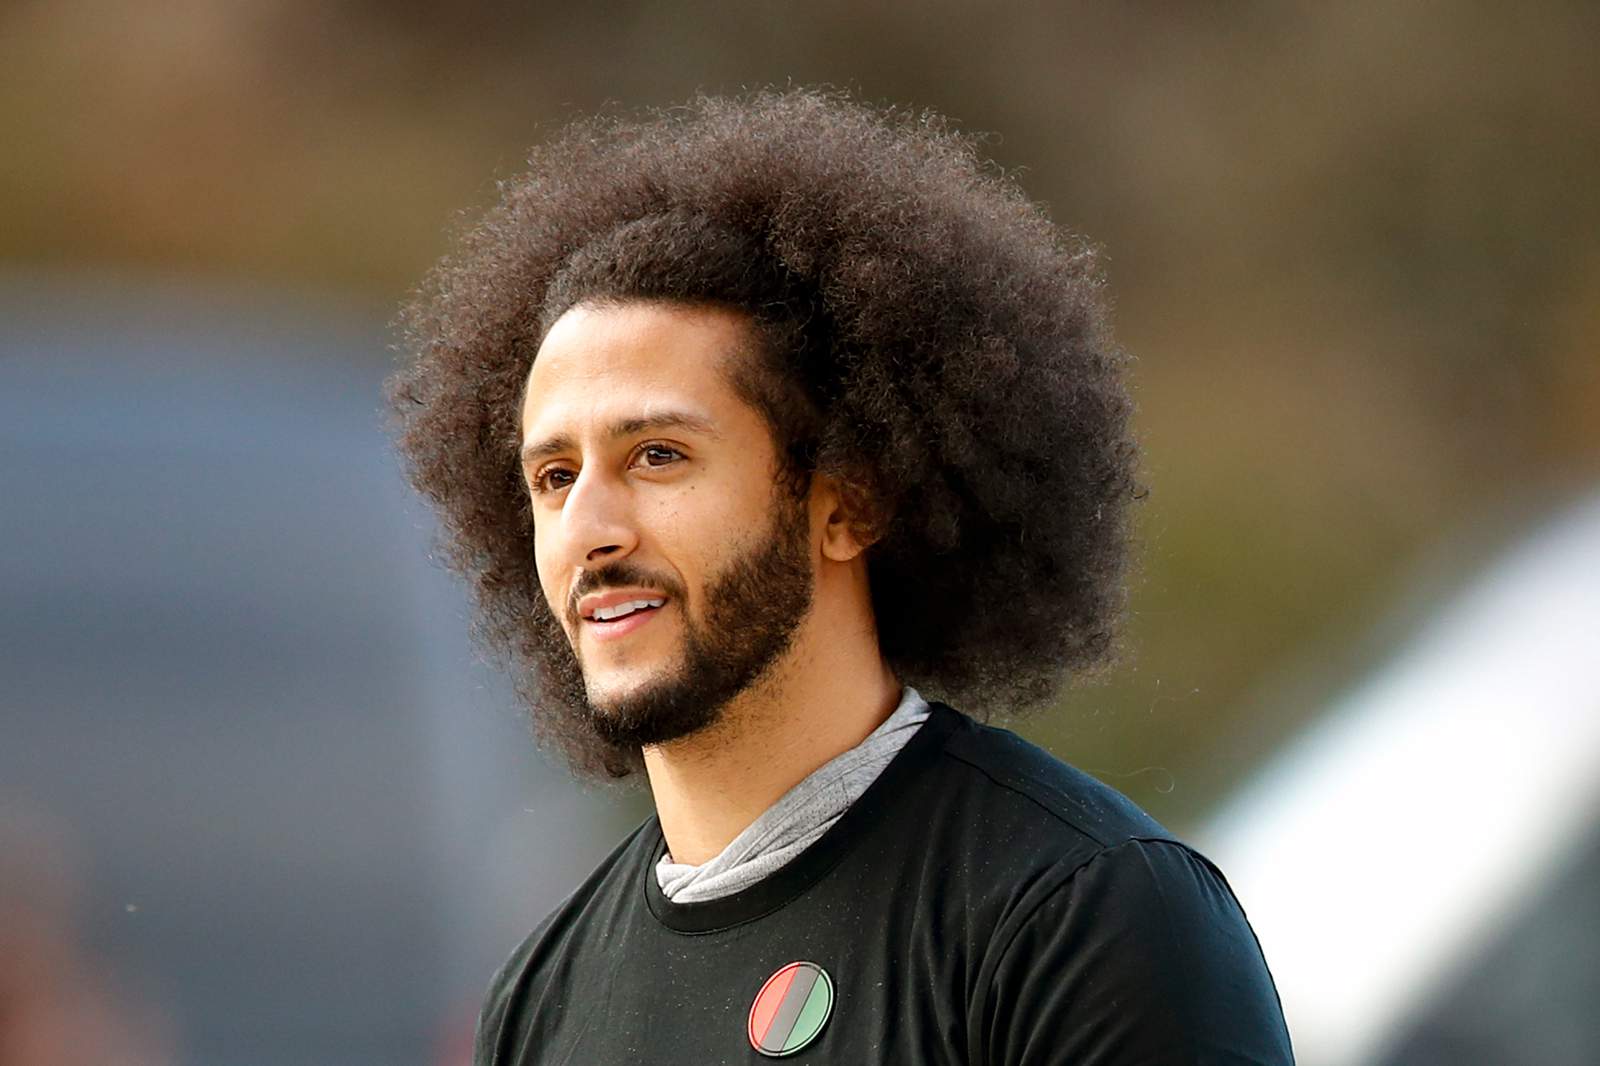 Colin Kaepernick is joining Mediums board to write about racism